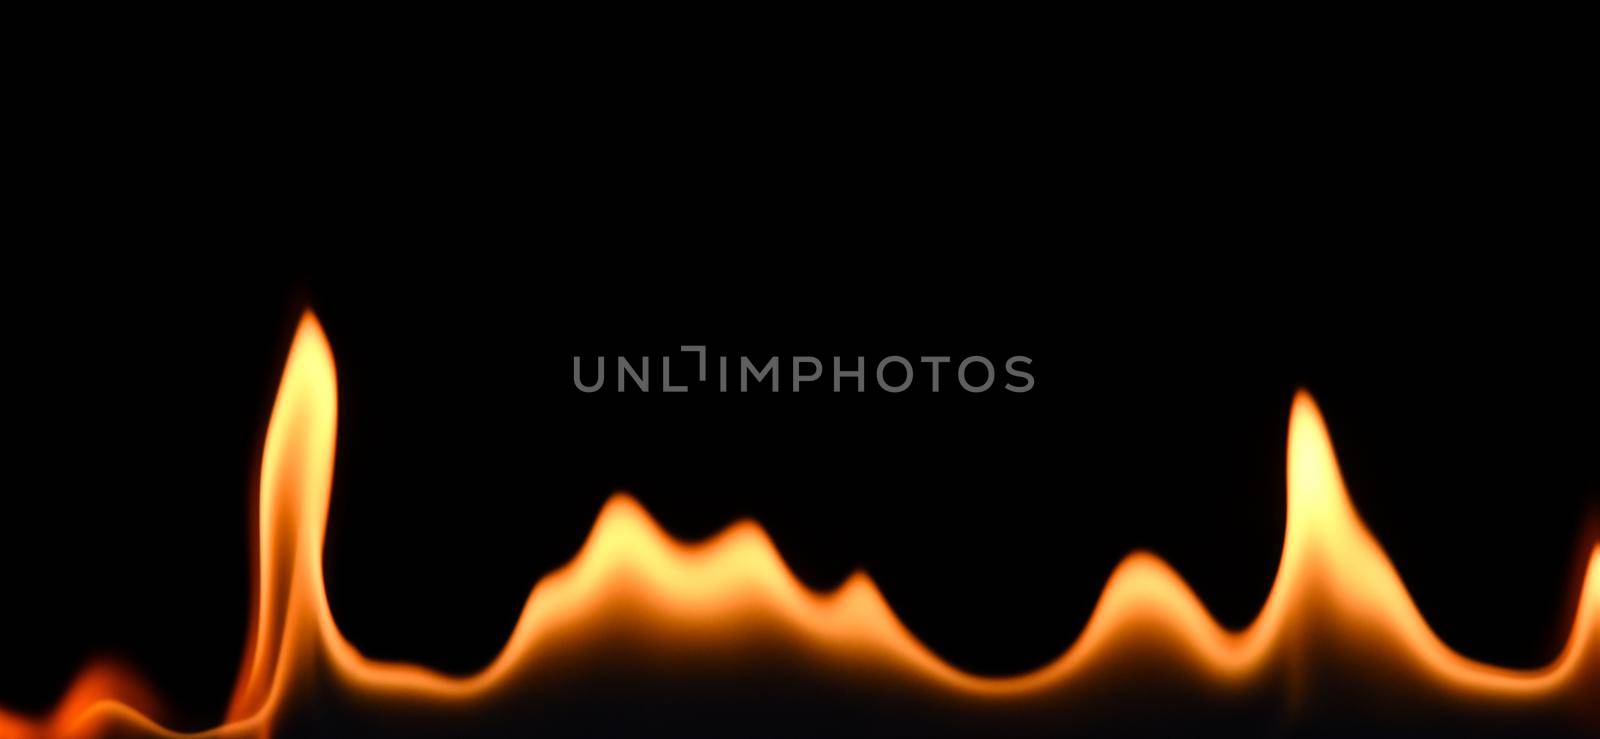 Close up line of fire flames pattern isolated on black background, low angle, side view